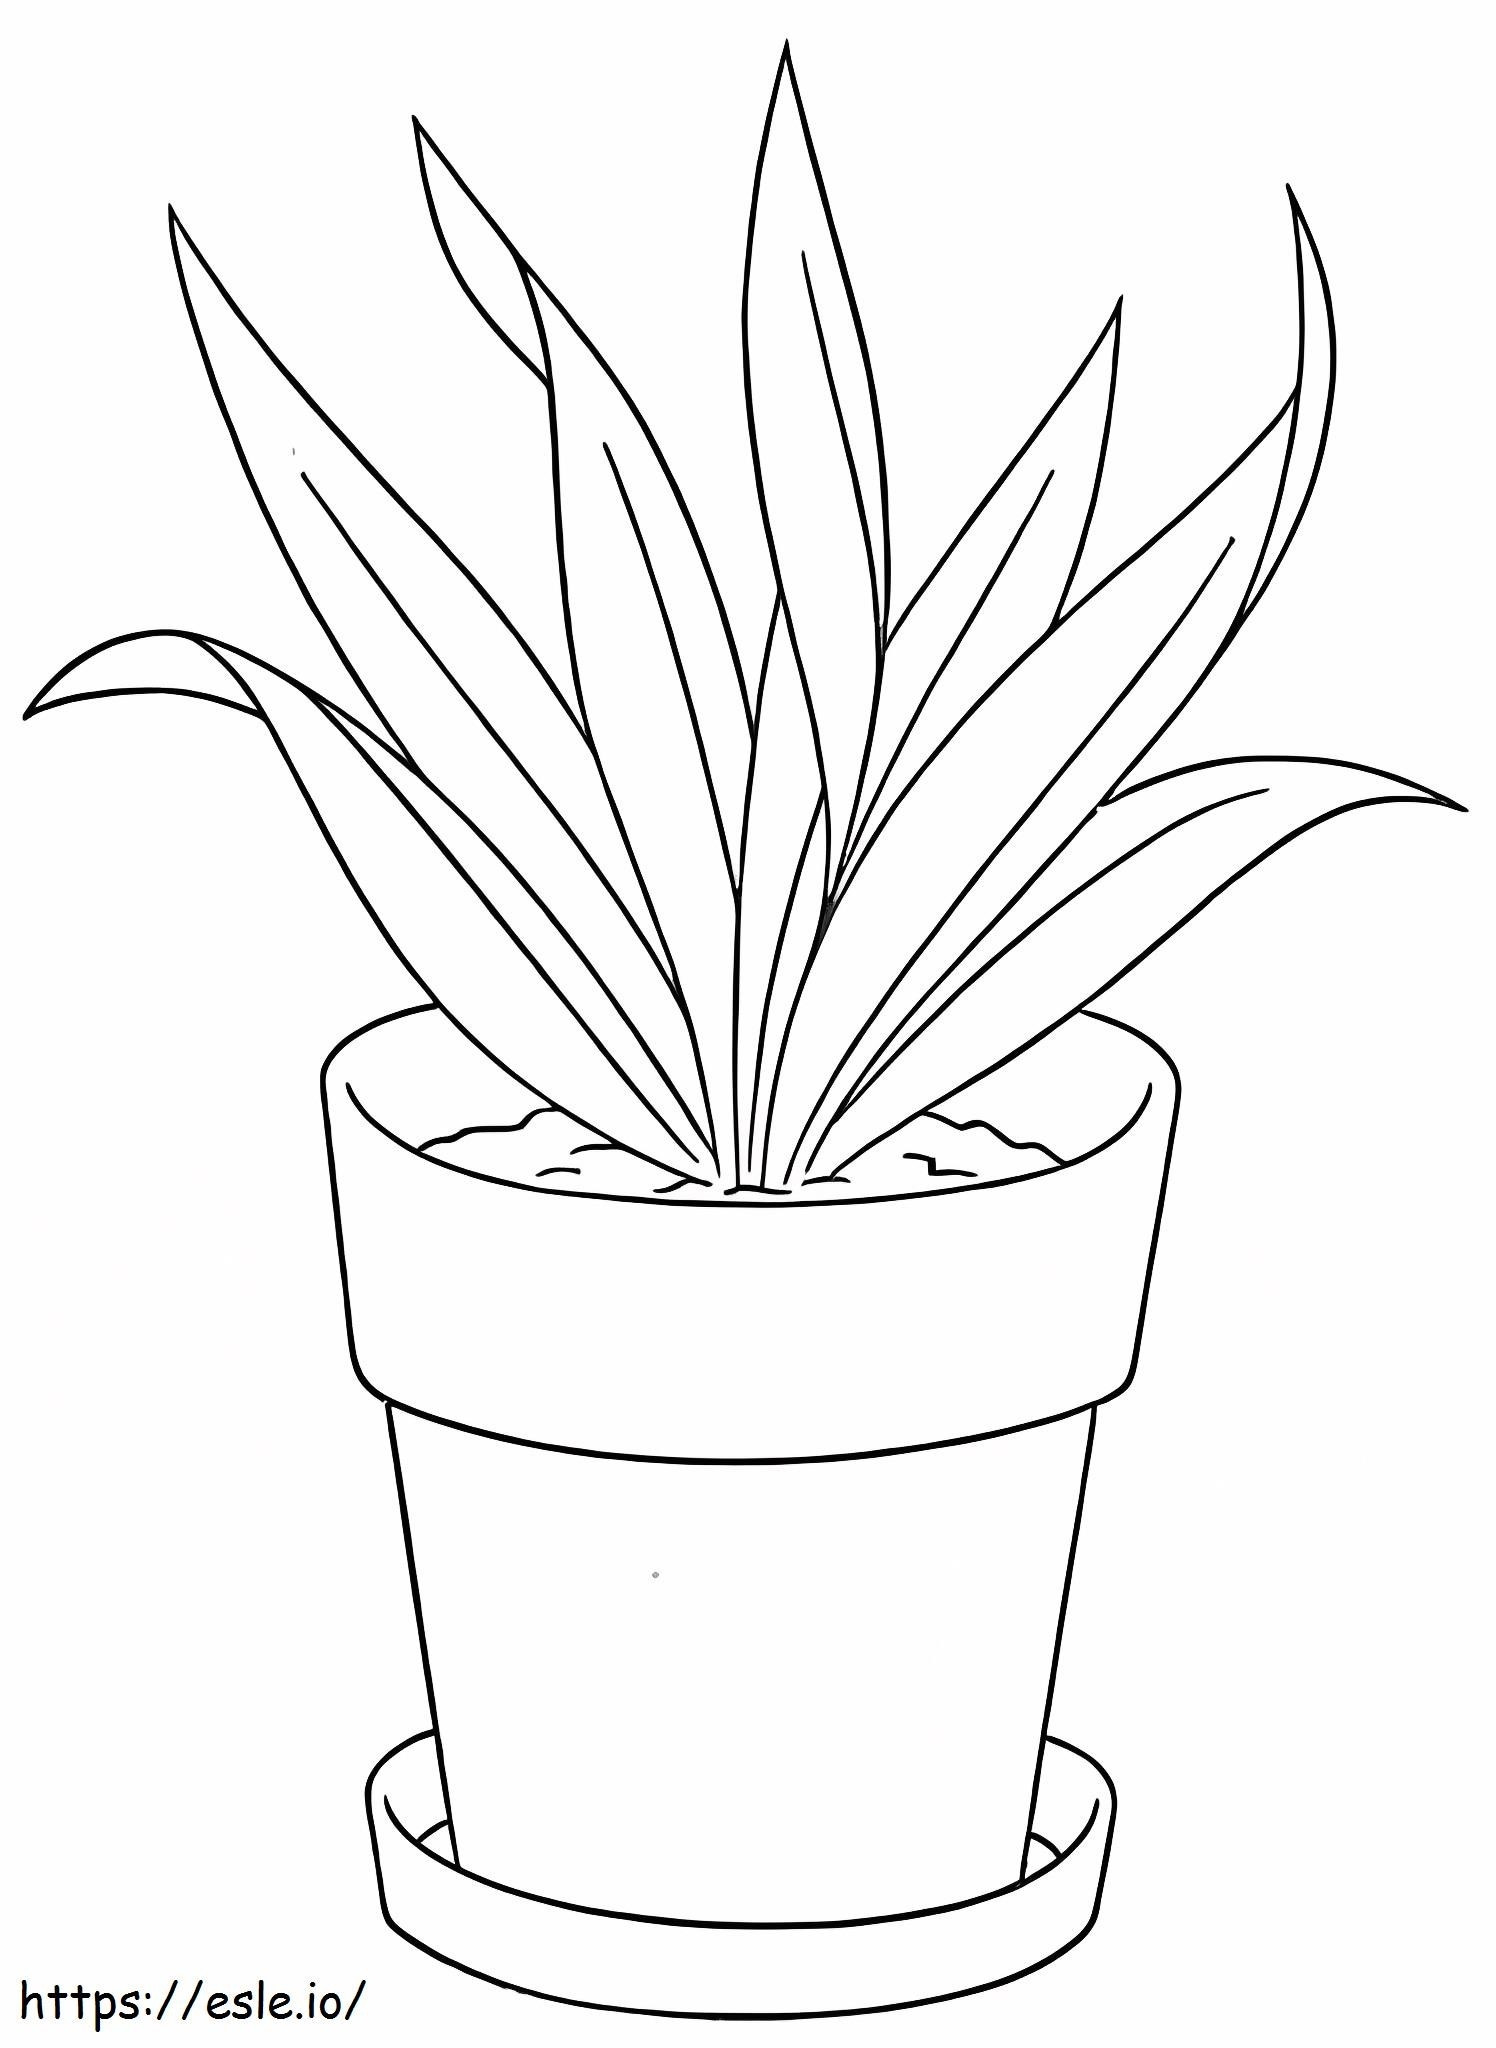 Printable Flower Pot coloring page